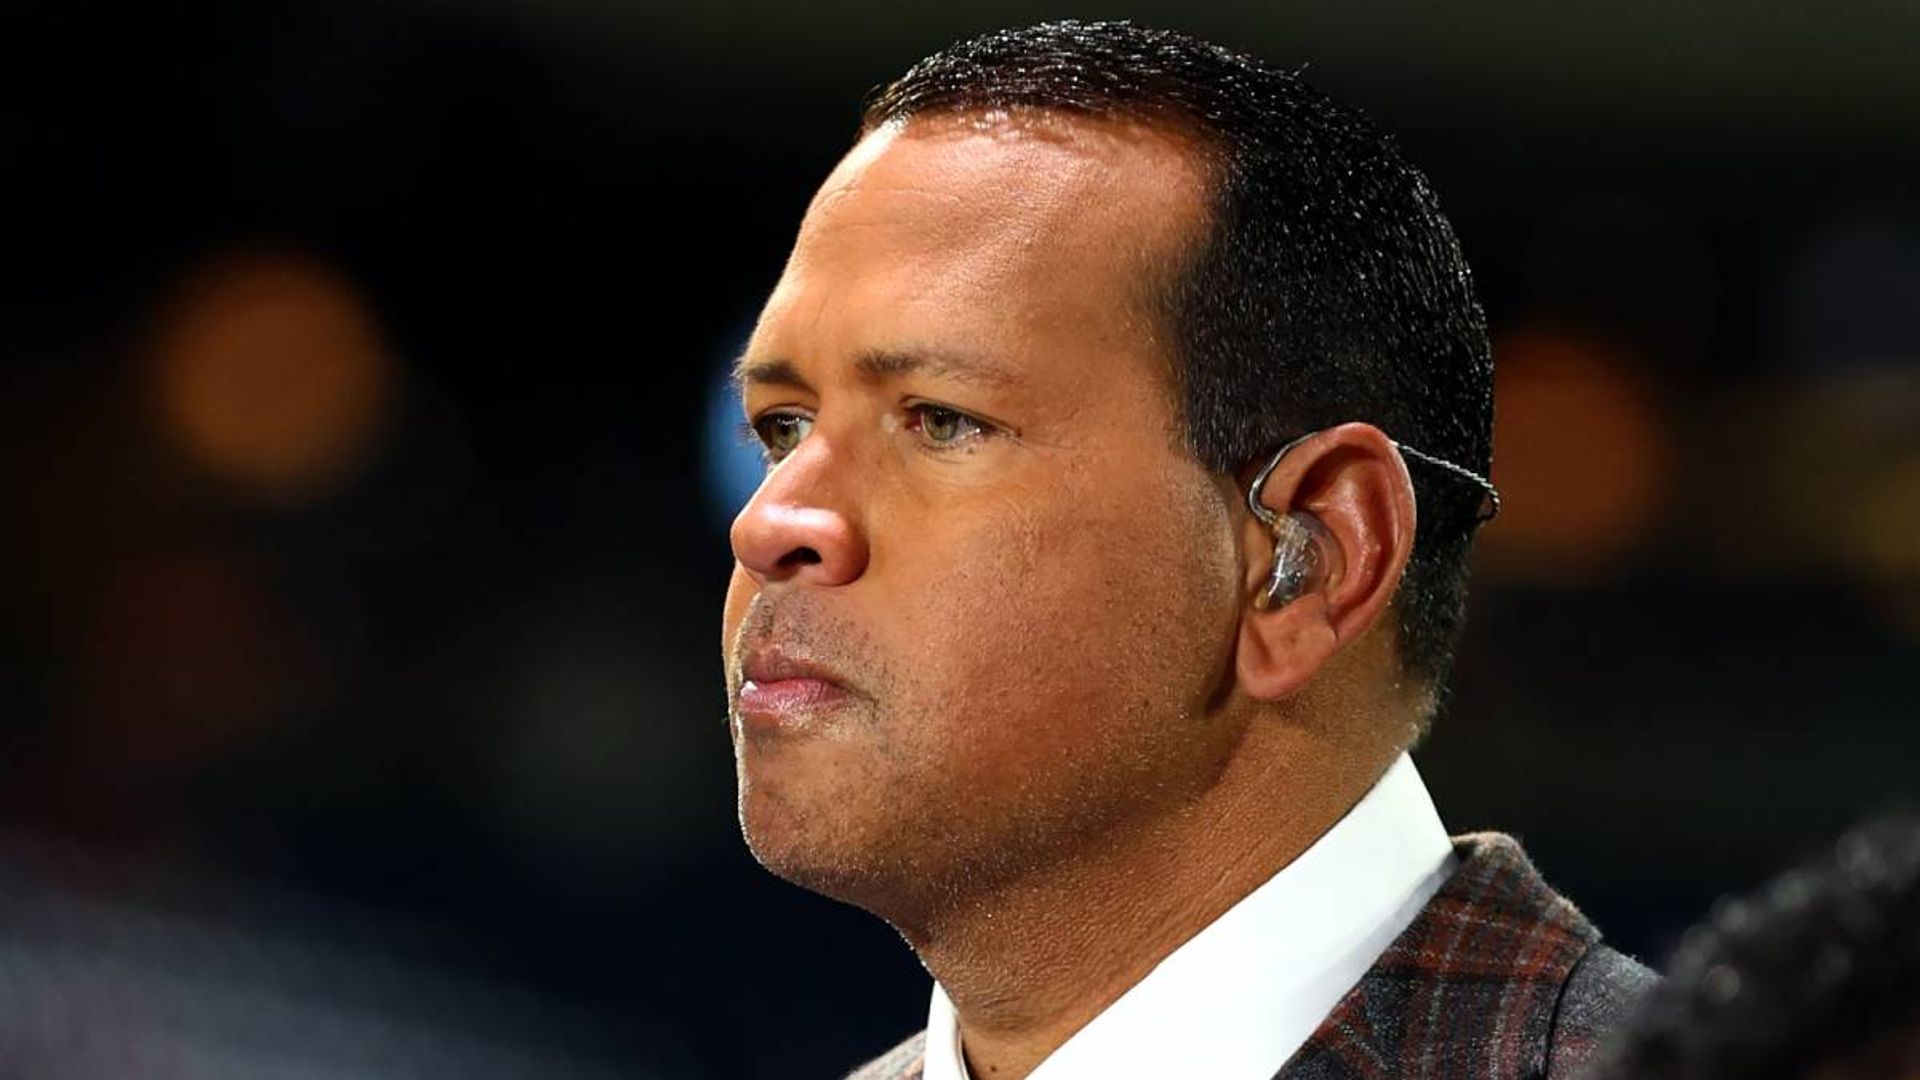 Alex Rodriguez details struggle as he gives raw update on family life -  supportive fans send kind words